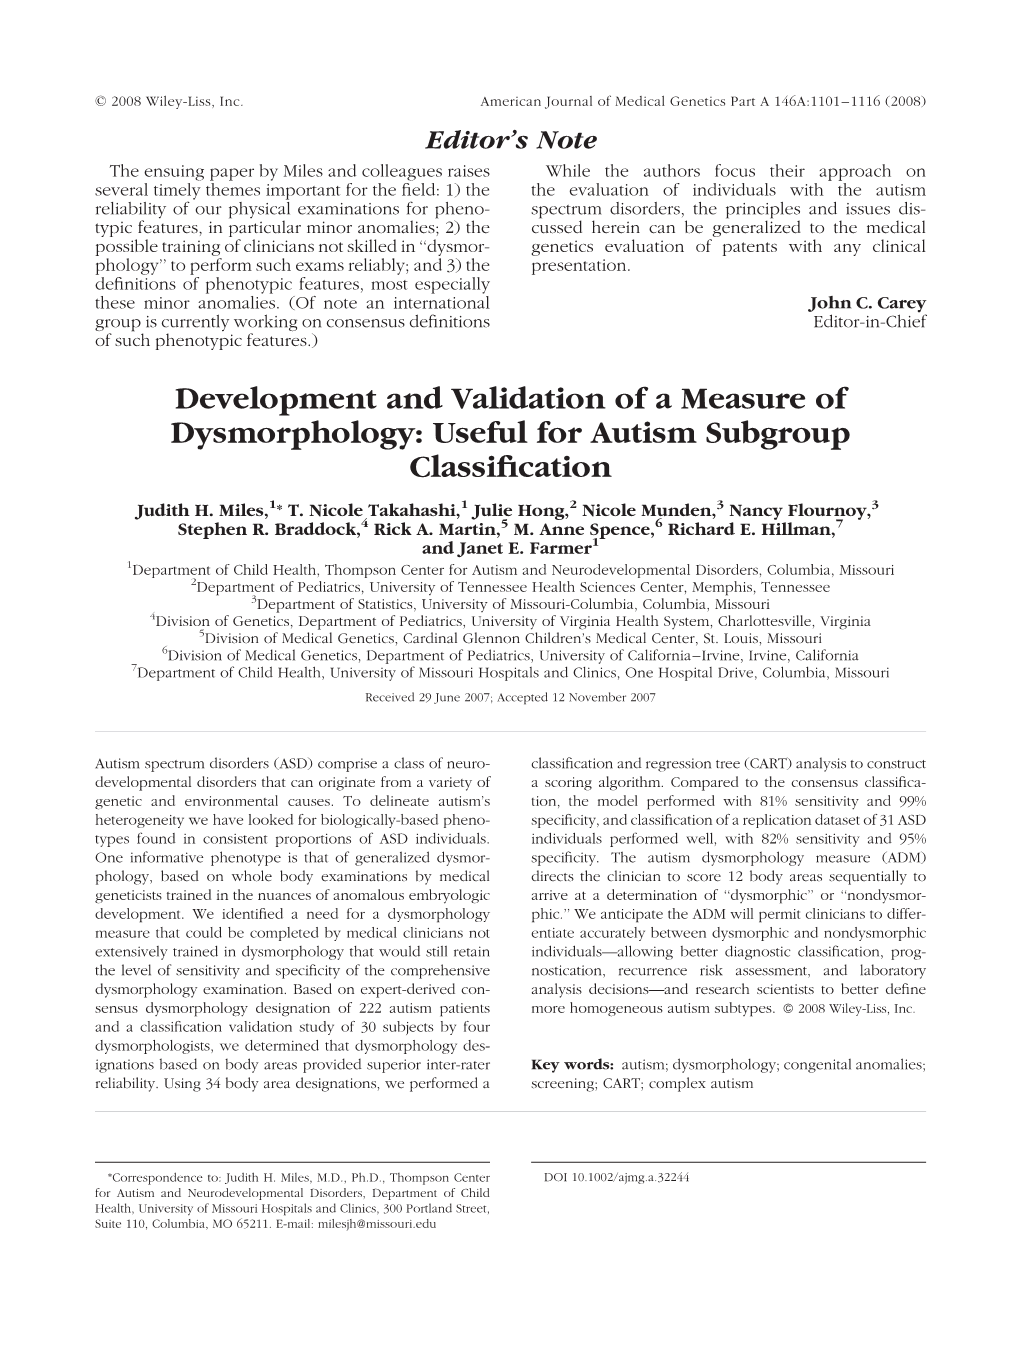 Development and Validation of a Measure of Dysmorphology: Useful for Autism Subgroup Classification